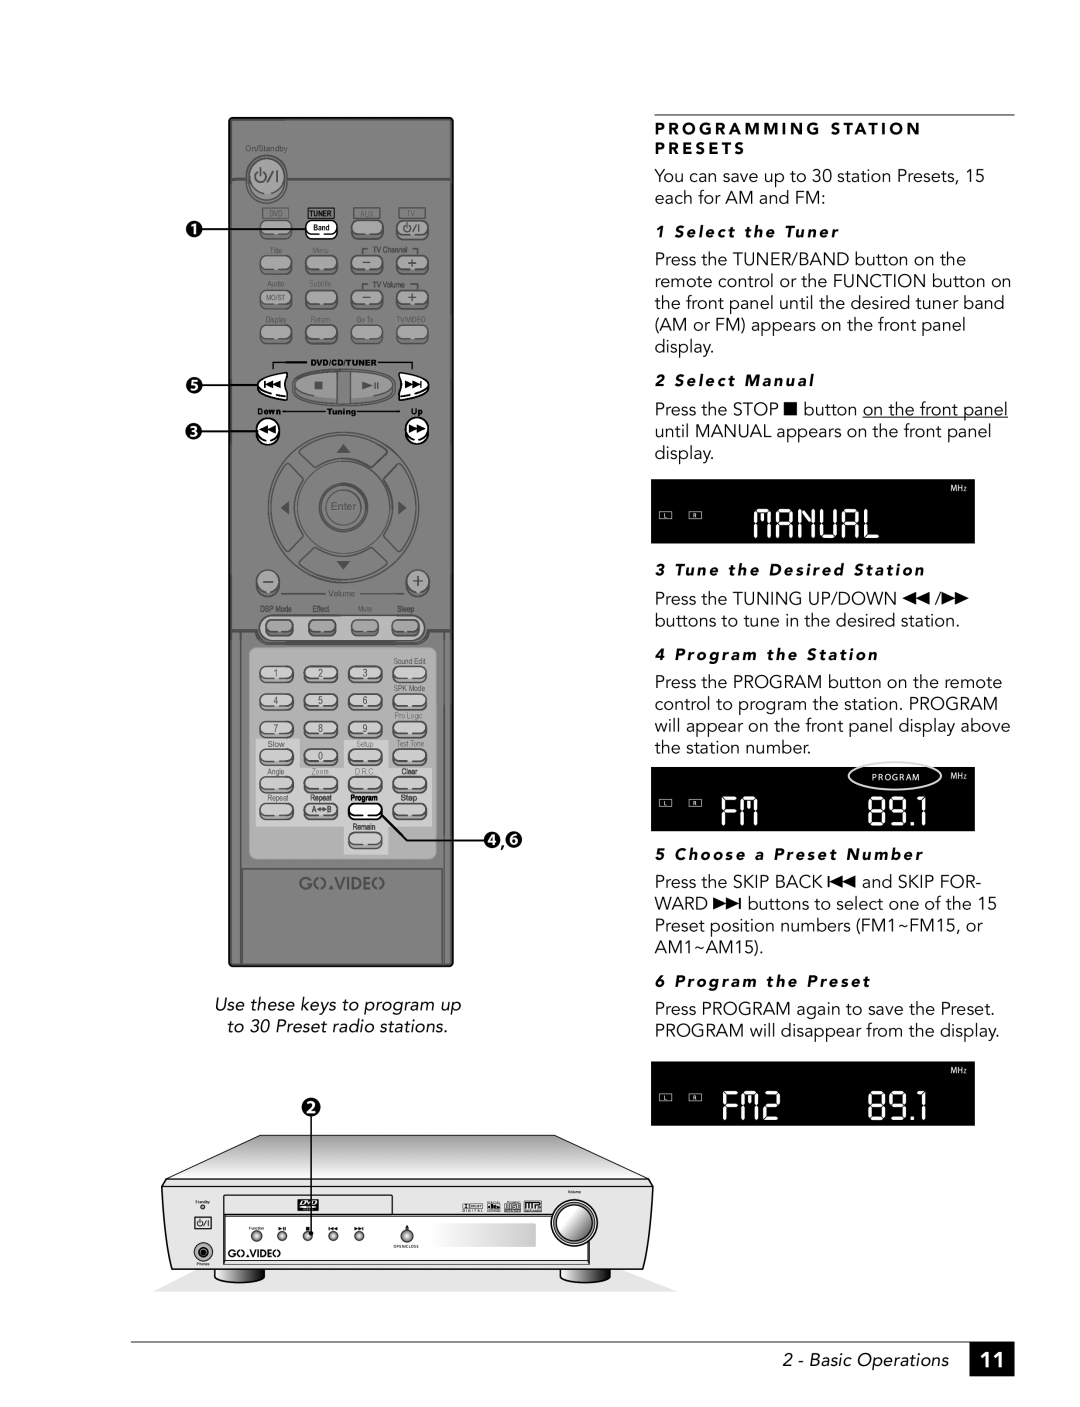 GoVideo DHT7100 manual Manual, 89.1, Use these keys to program up, to 30 Preset radio stations, Basic Operations 